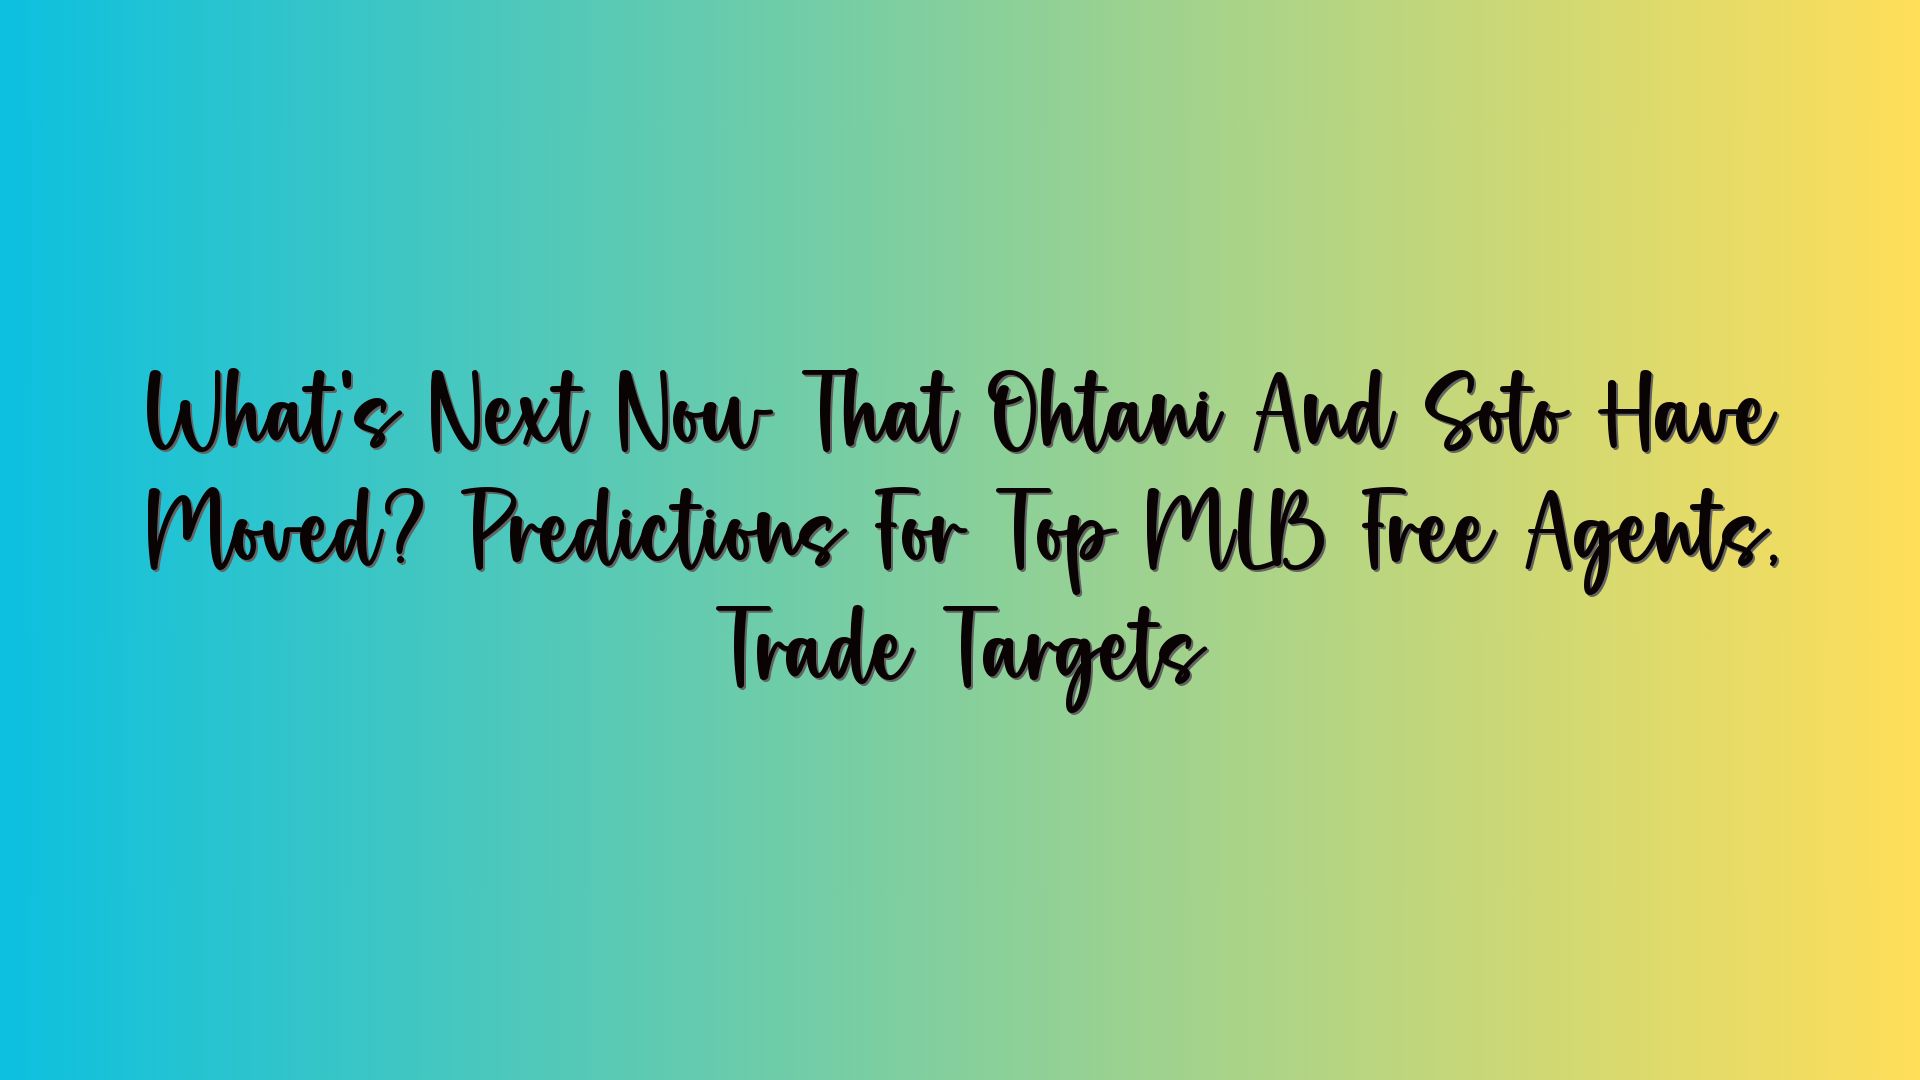 What’s Next Now That Ohtani And Soto Have Moved? Predictions For Top MLB Free Agents, Trade Targets